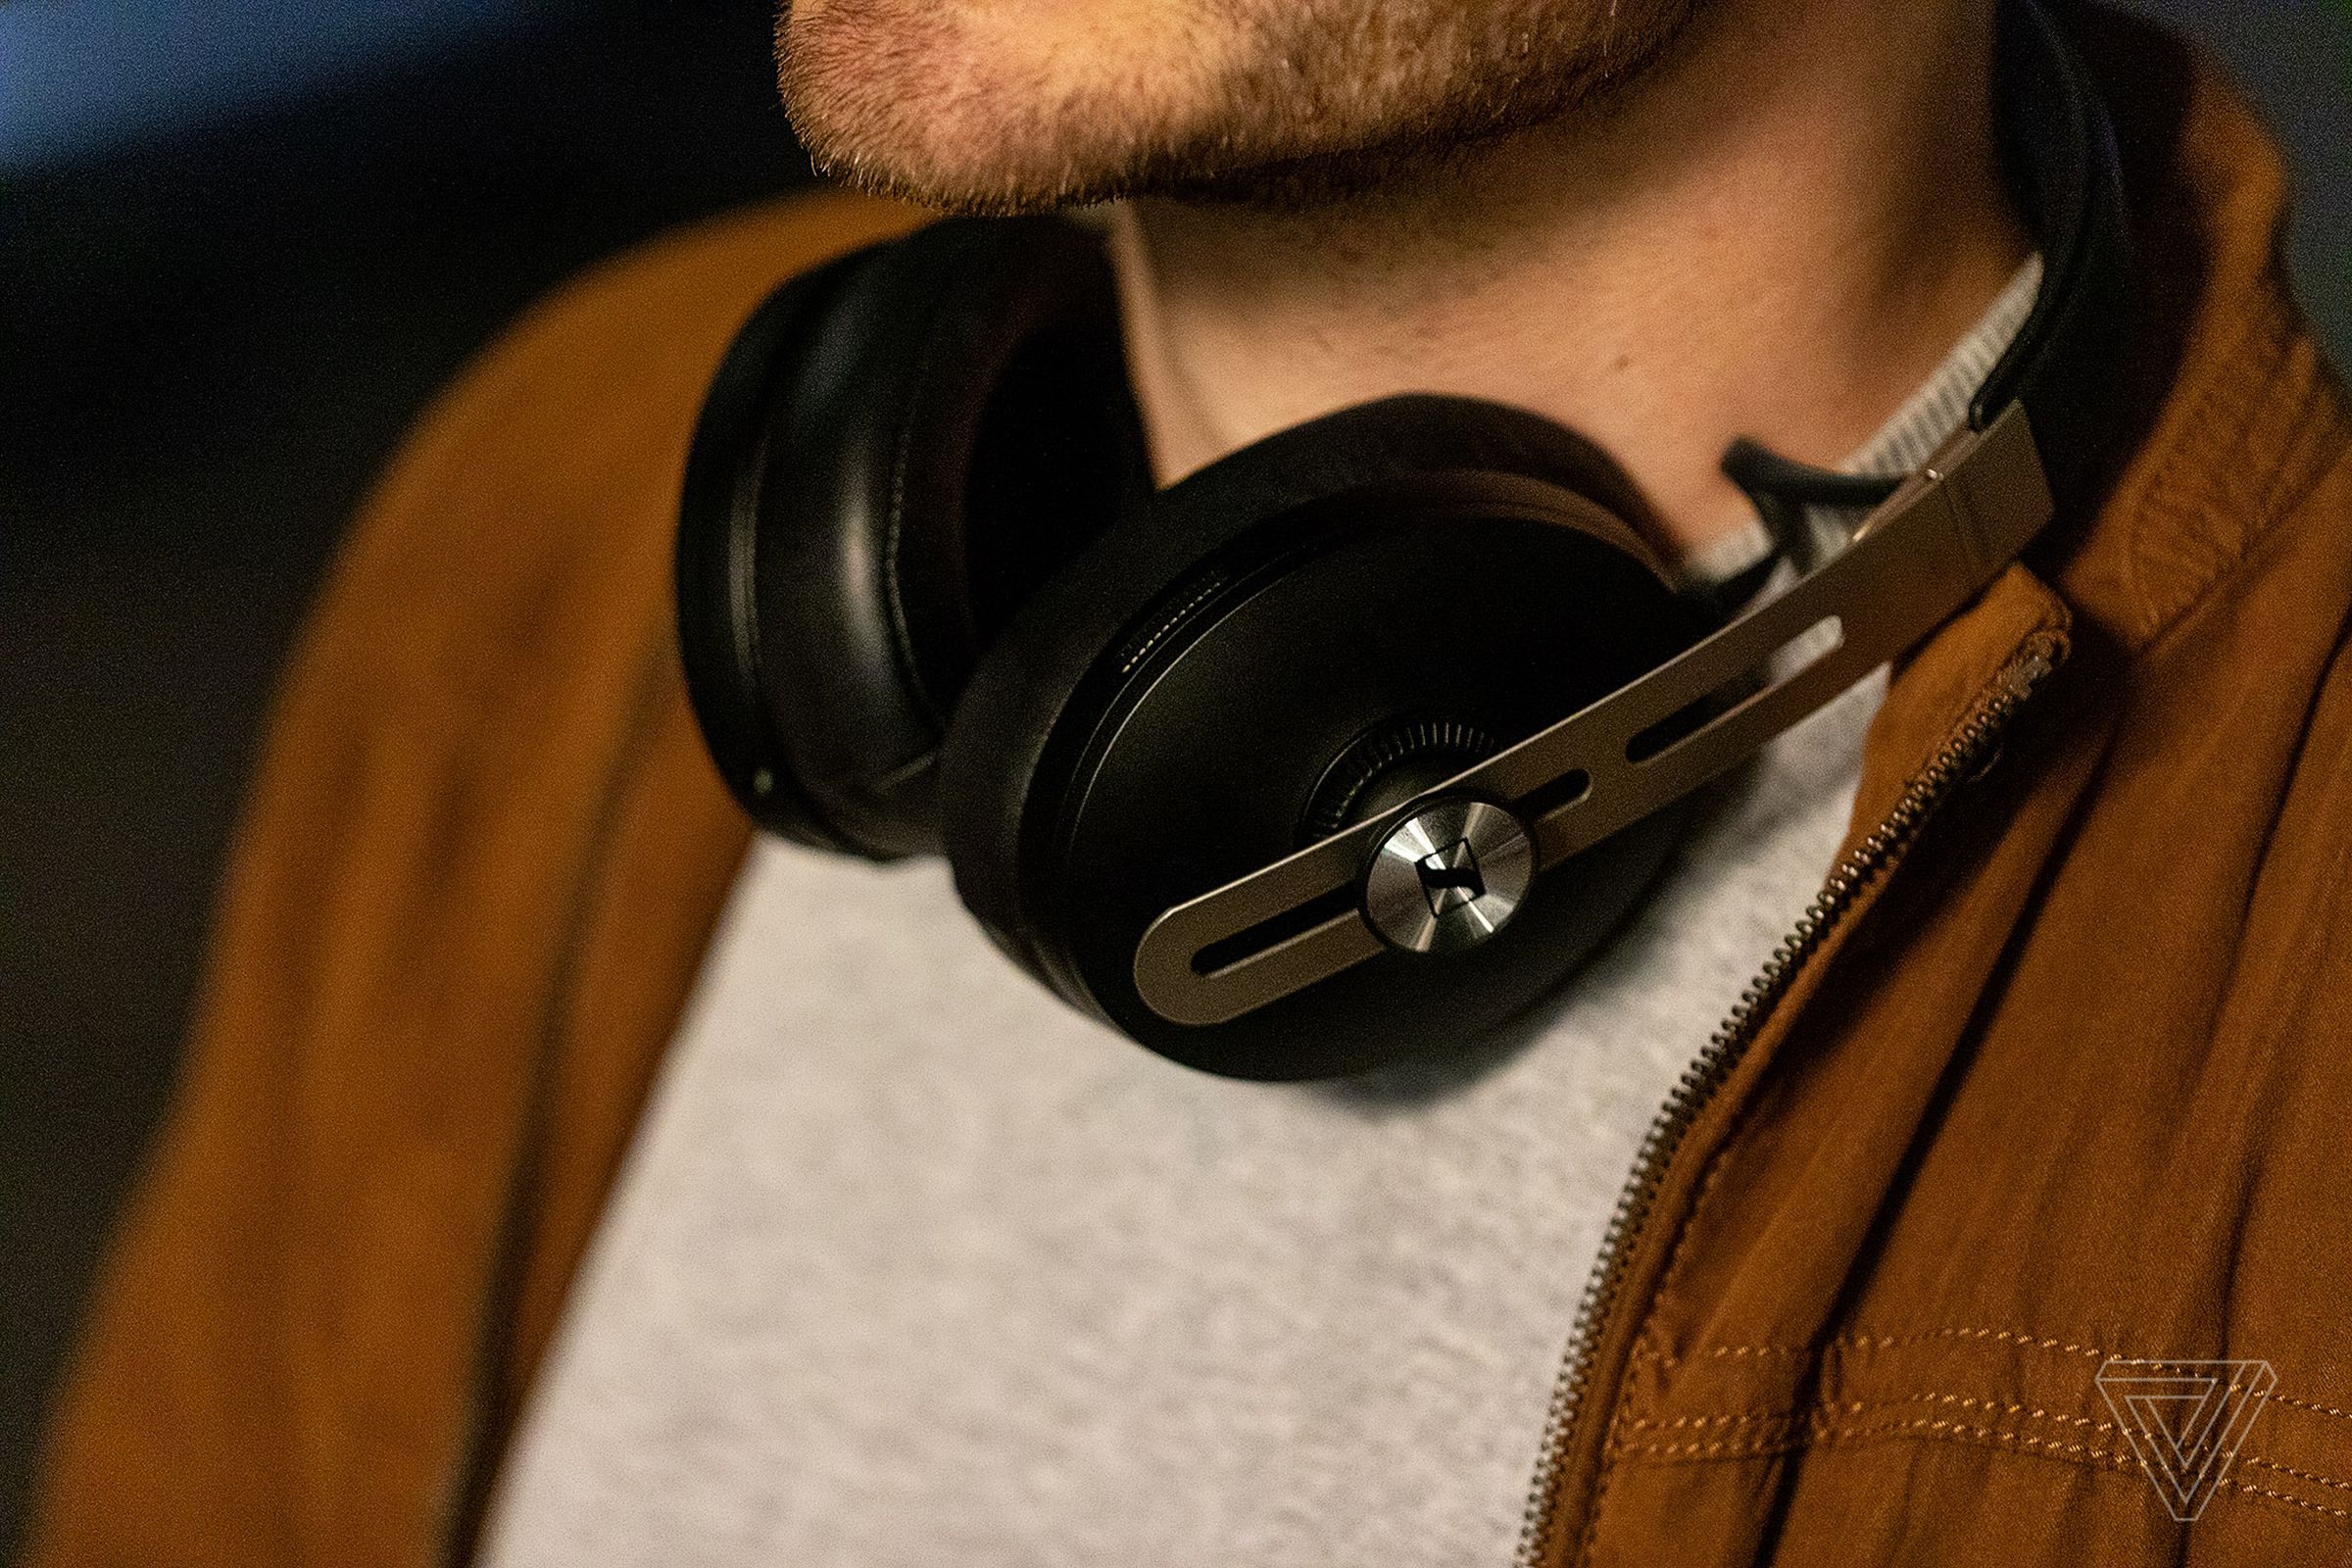 A photo of Sennheiser’s Momentum Wireless 3 headphones, previously our best noise-canceling headphones for sound quality, worn around someone’s neck.